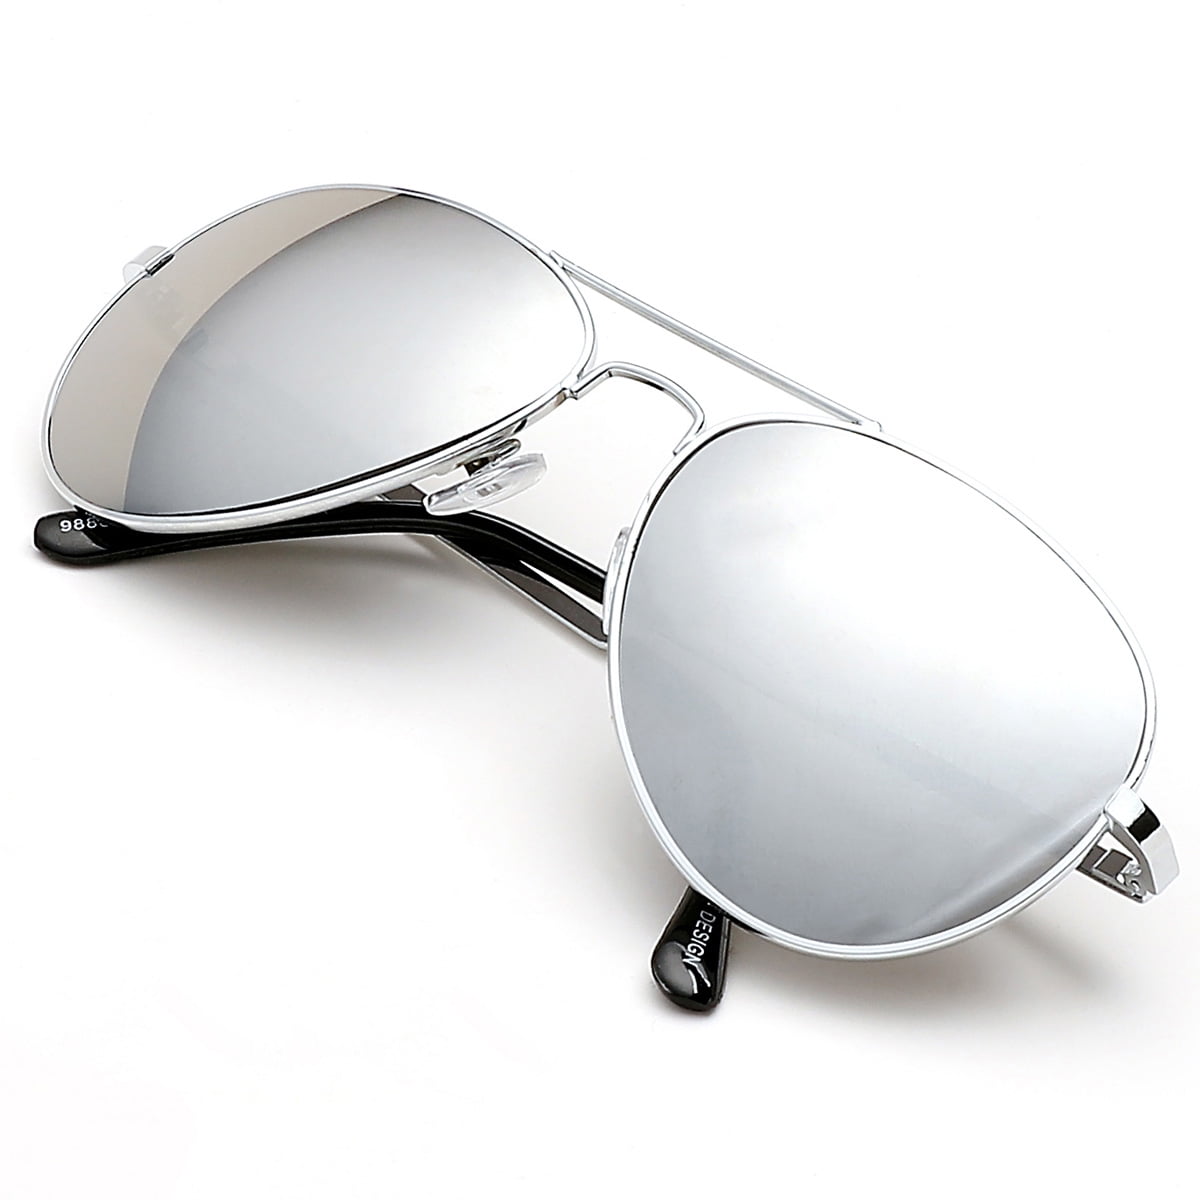 Retro Frog Mirrored Aviator Sunglasses With Reflective Mirror For Men And  Women Classic Outdoor Eyewear From Emma12345, $1.46